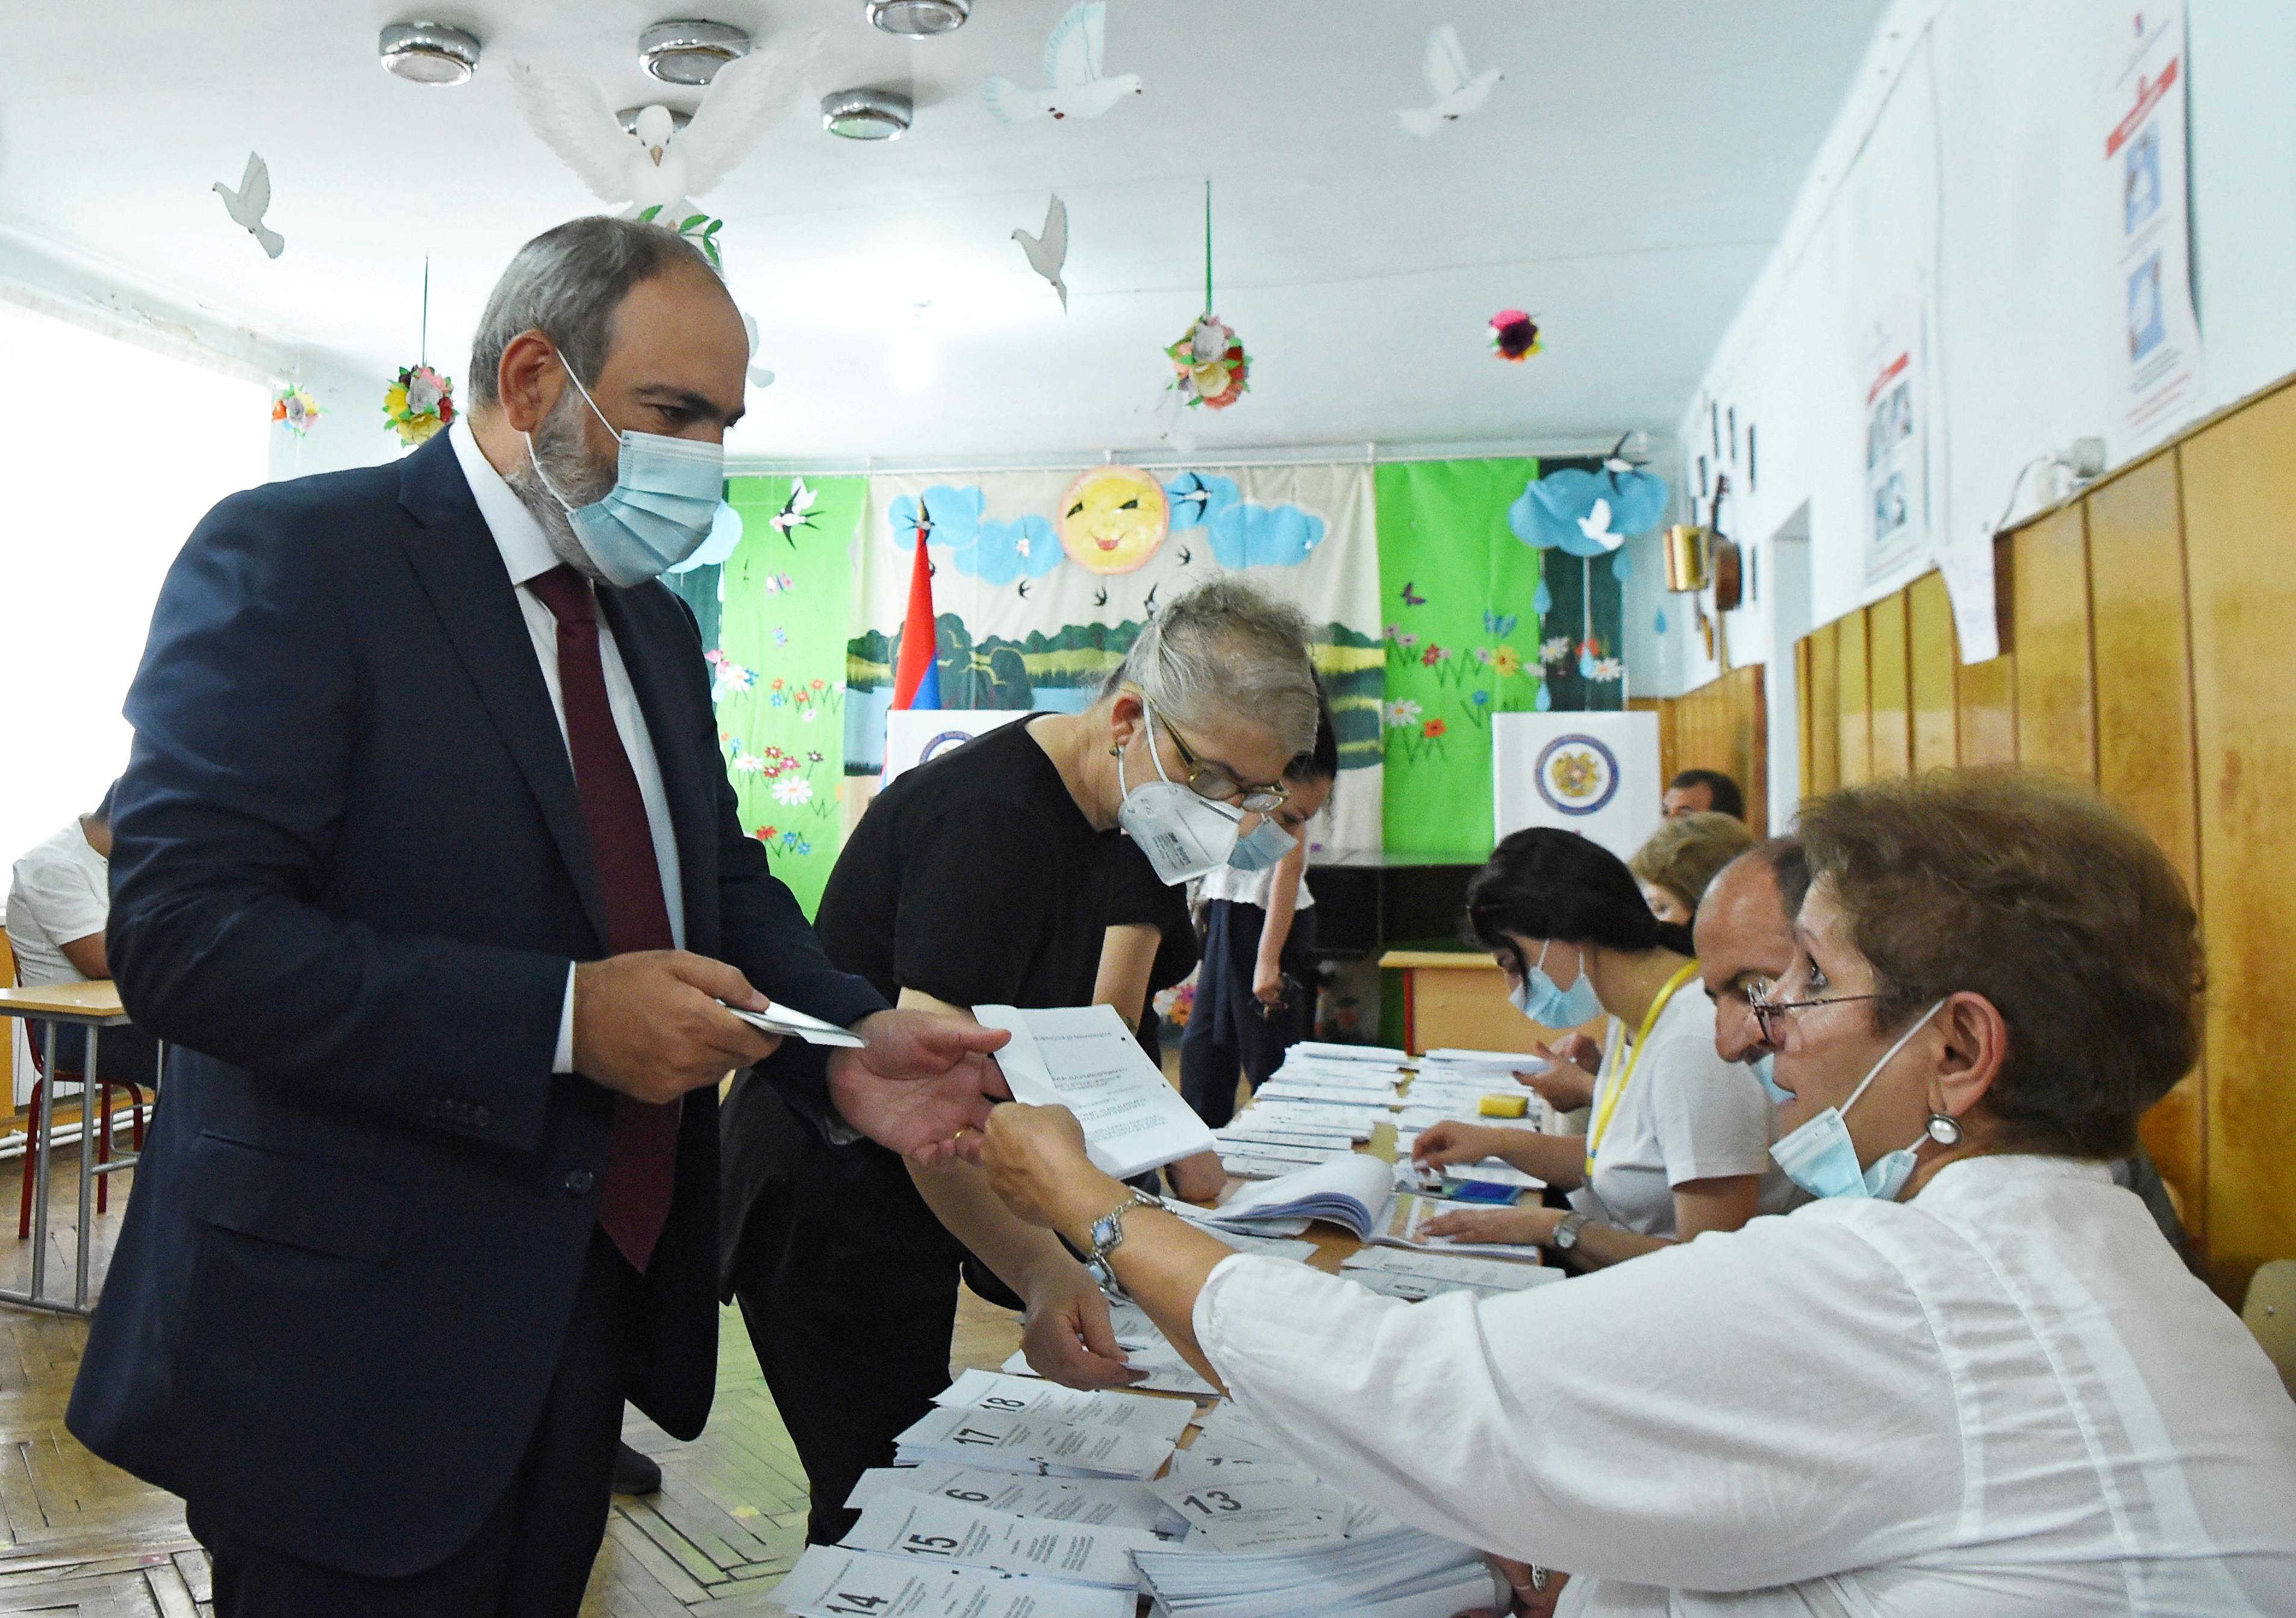 Armenia's acting Prime Minister and leader of Civil Contract party Nikol Pashinyan receives a ballot at a polling station during the snap parliamentary election in Yerevan, Armenia June 20, 2021. Lusi Sargsyan/Photolure via REUTERS